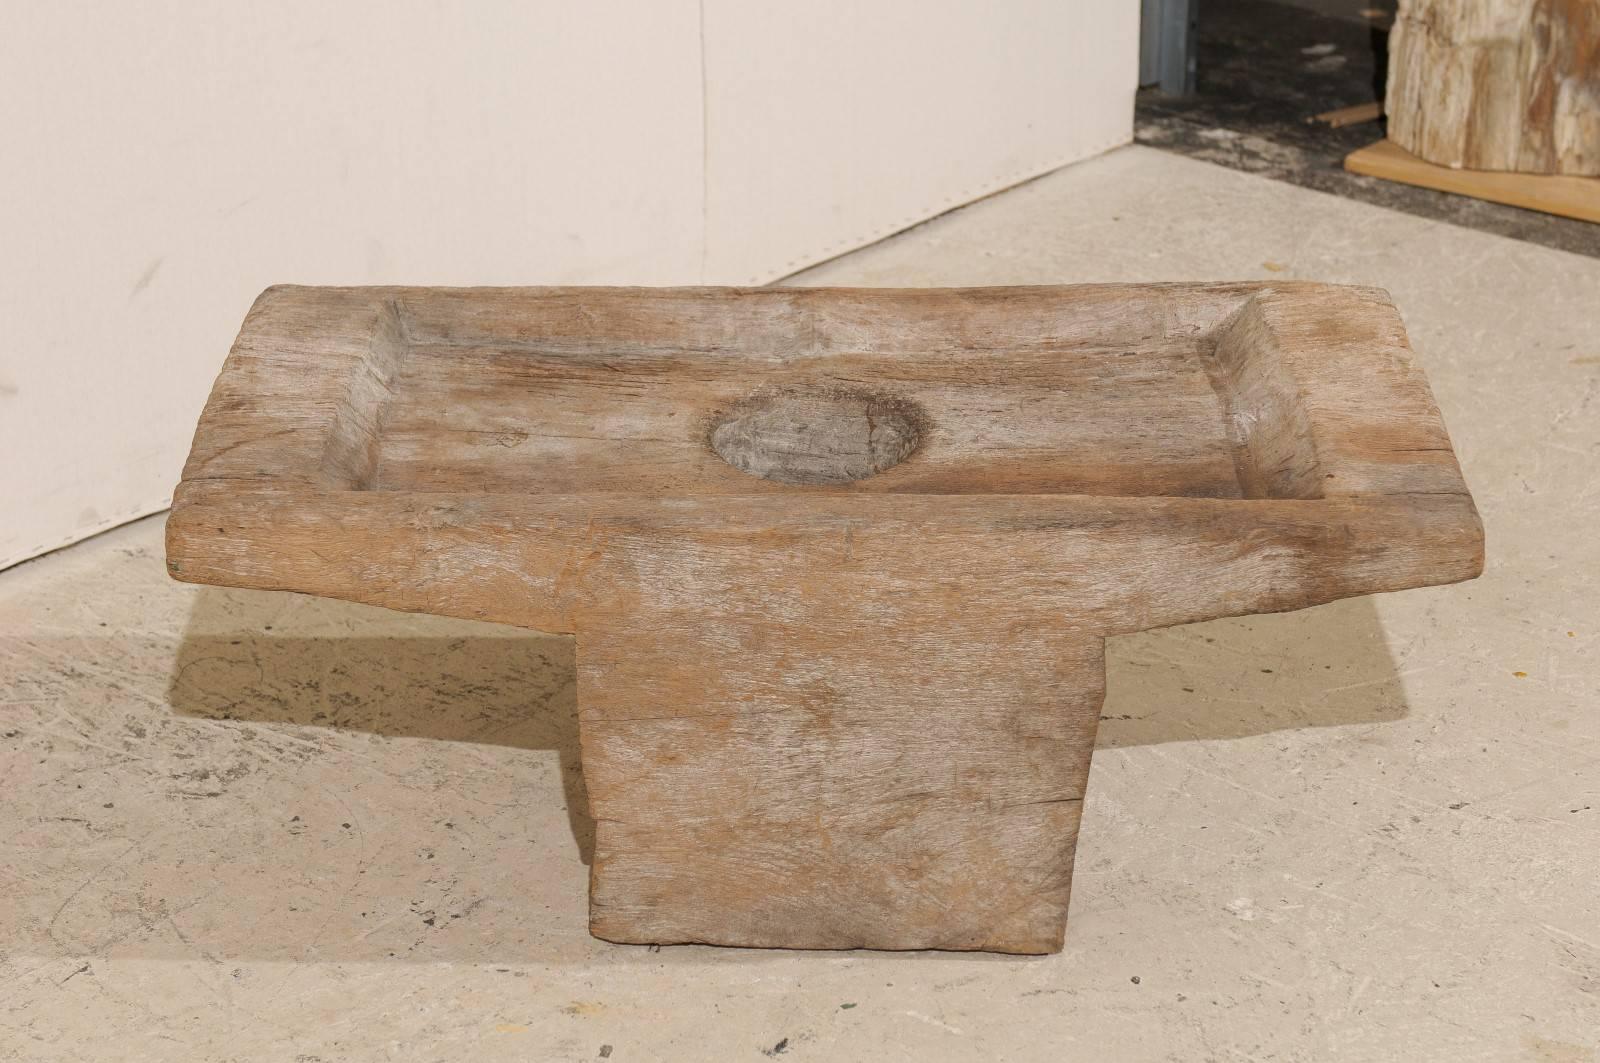 Wood Rustic Indonesian Grain Grinder from the Early 20th Century Made Coffee Table